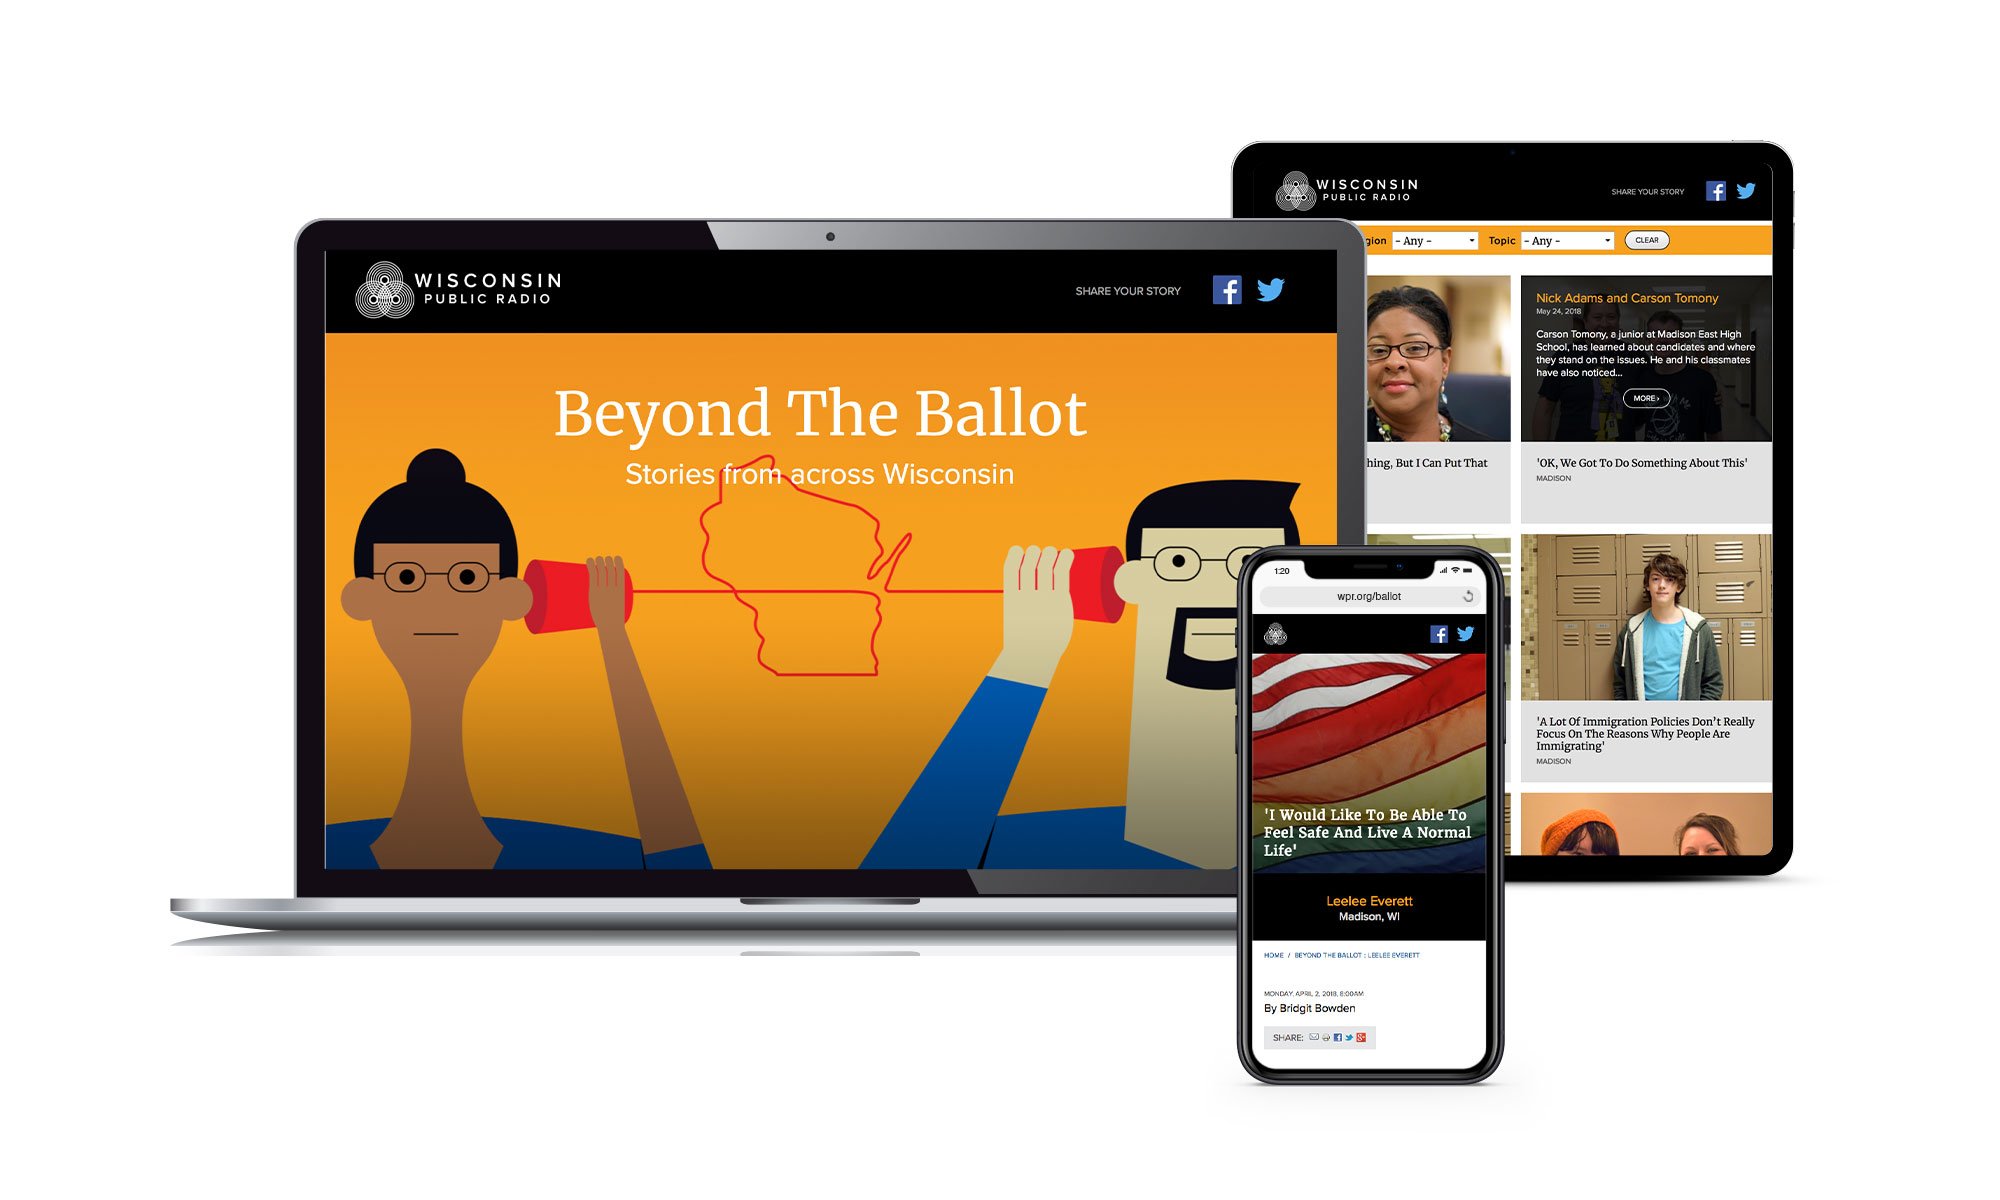 Wisconsin Public Radio’s Beyond The Ballot website, created by Vendi, displayed on laptop, tablet and phone screens